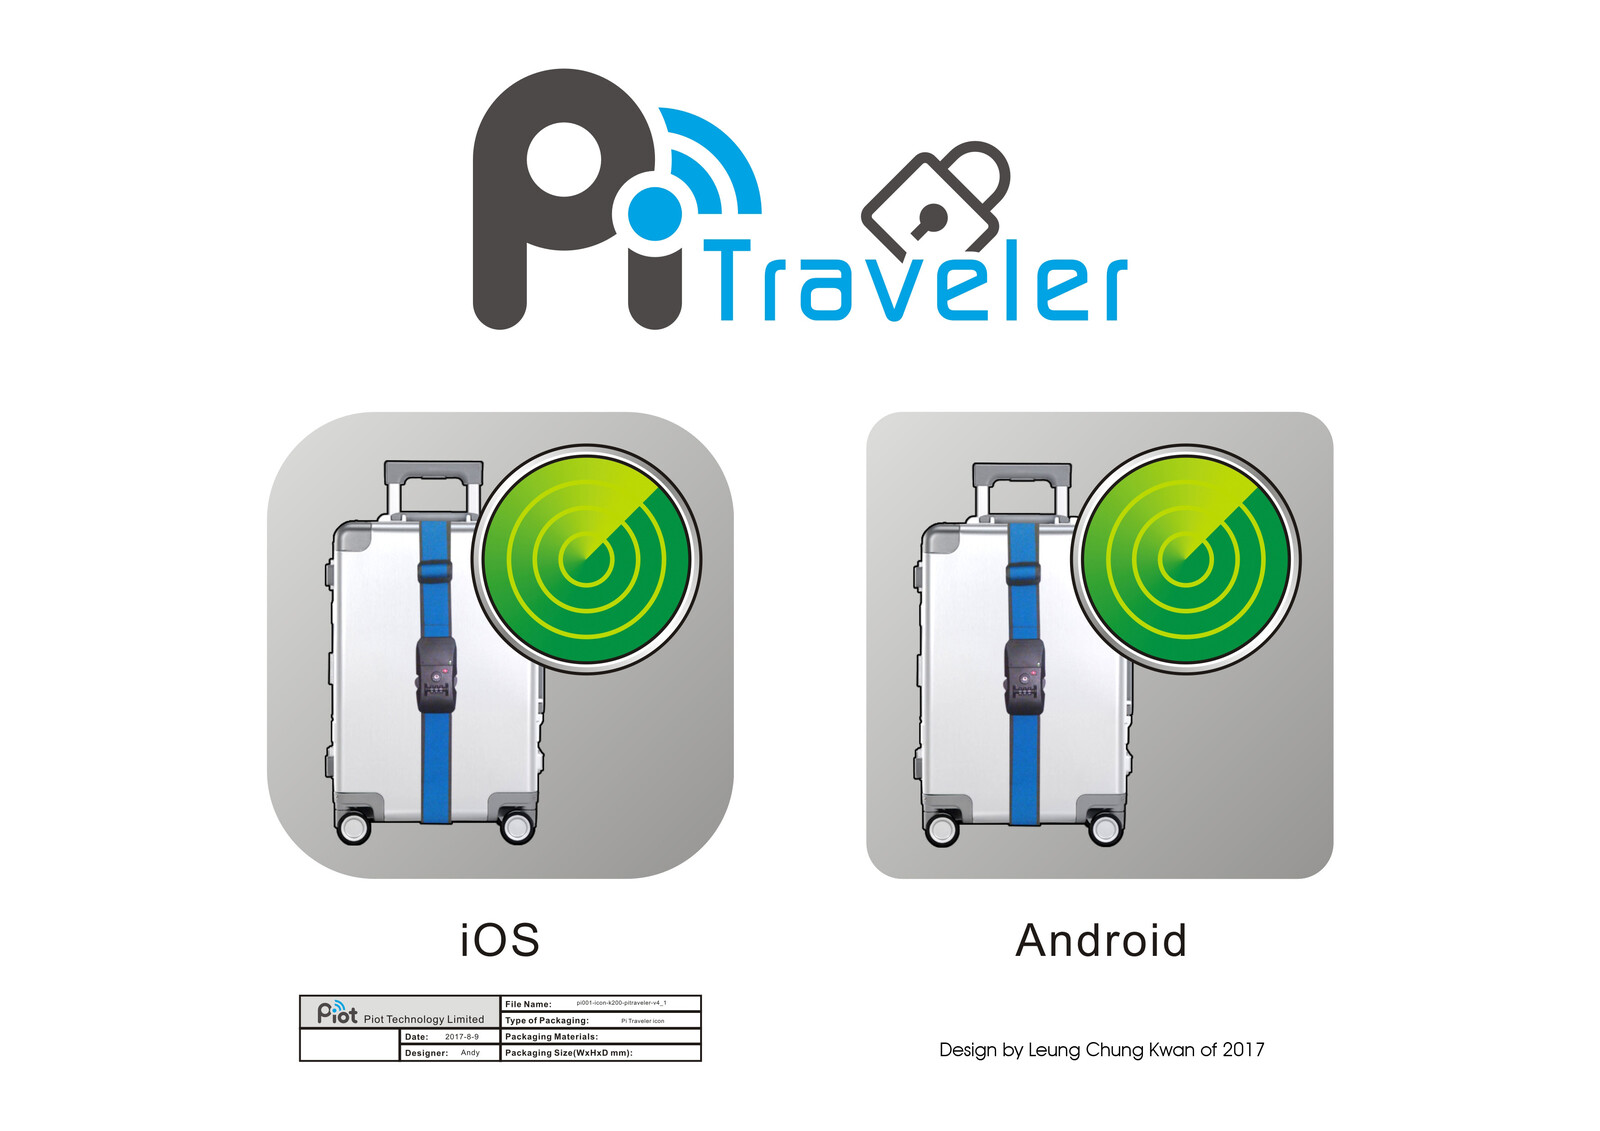 💎 App Icon | Design by Leung Chung Kwan on 2017 💎
App Name︰Pitraveler | Client︰Piot Technology Limited
Android App︰https://apk.tools/details-pitraveler-apk